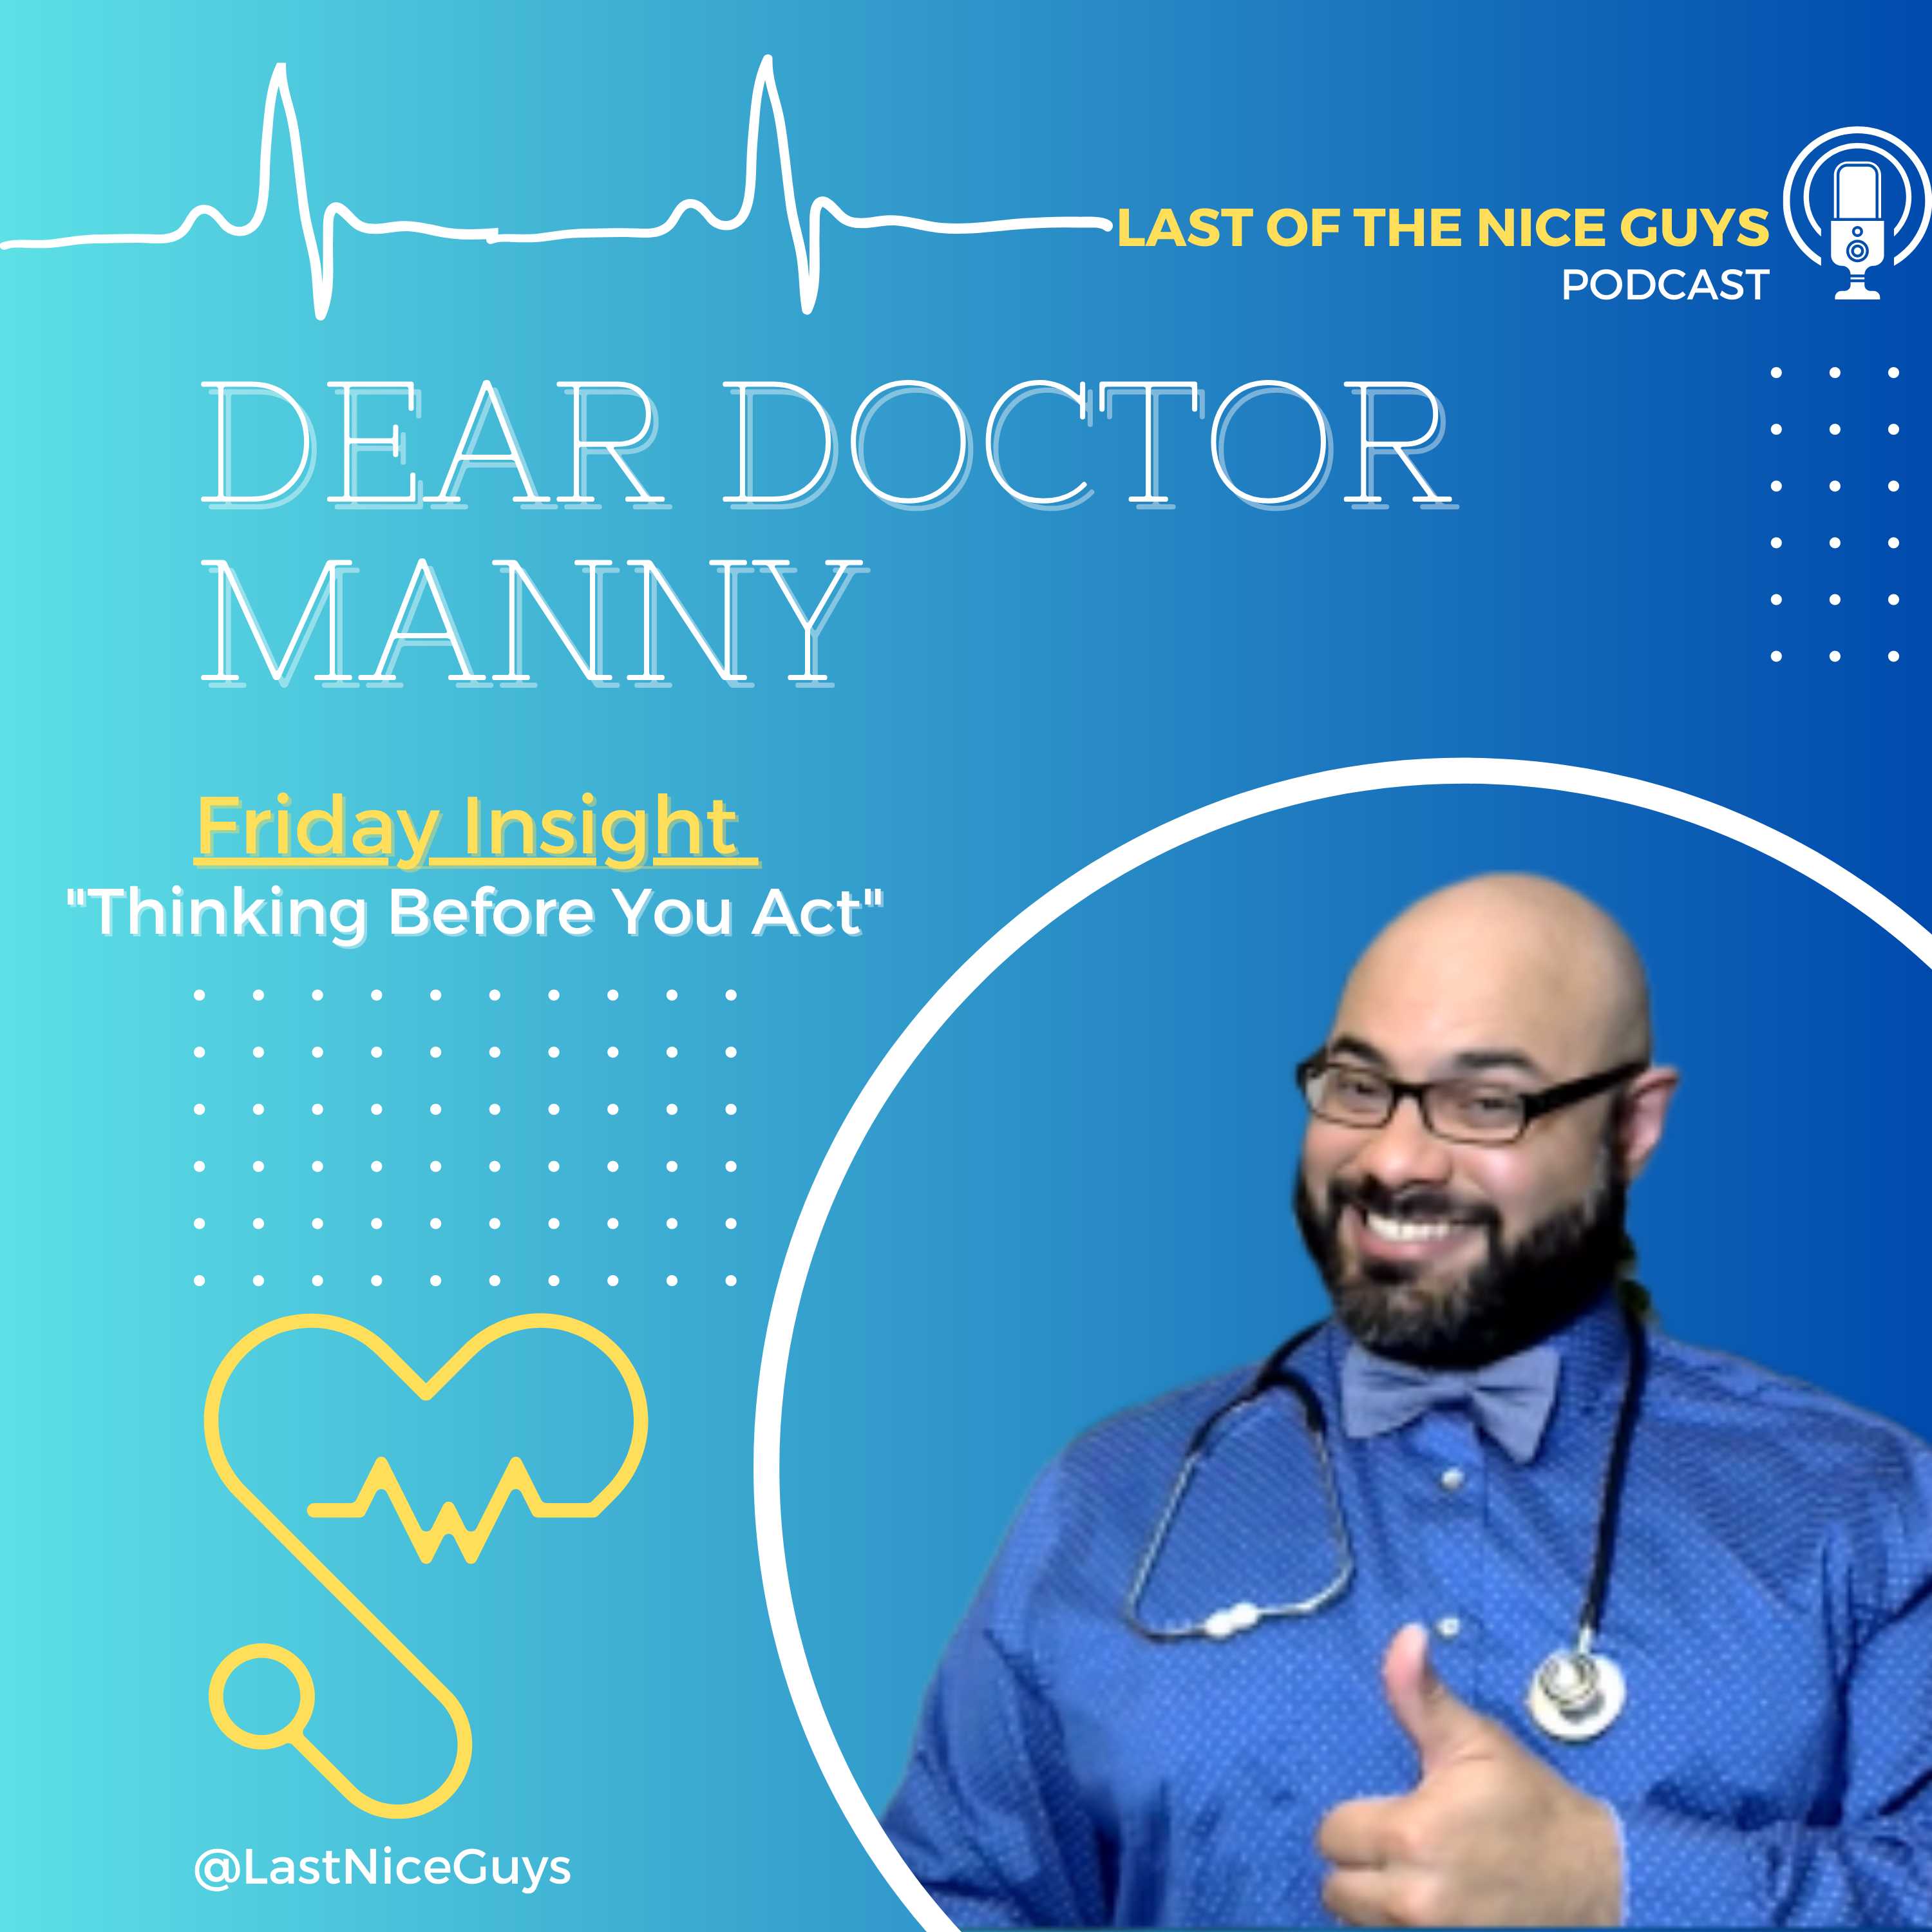 Thinking Before You React -  "Dear Doctor Manny" Friday Insight